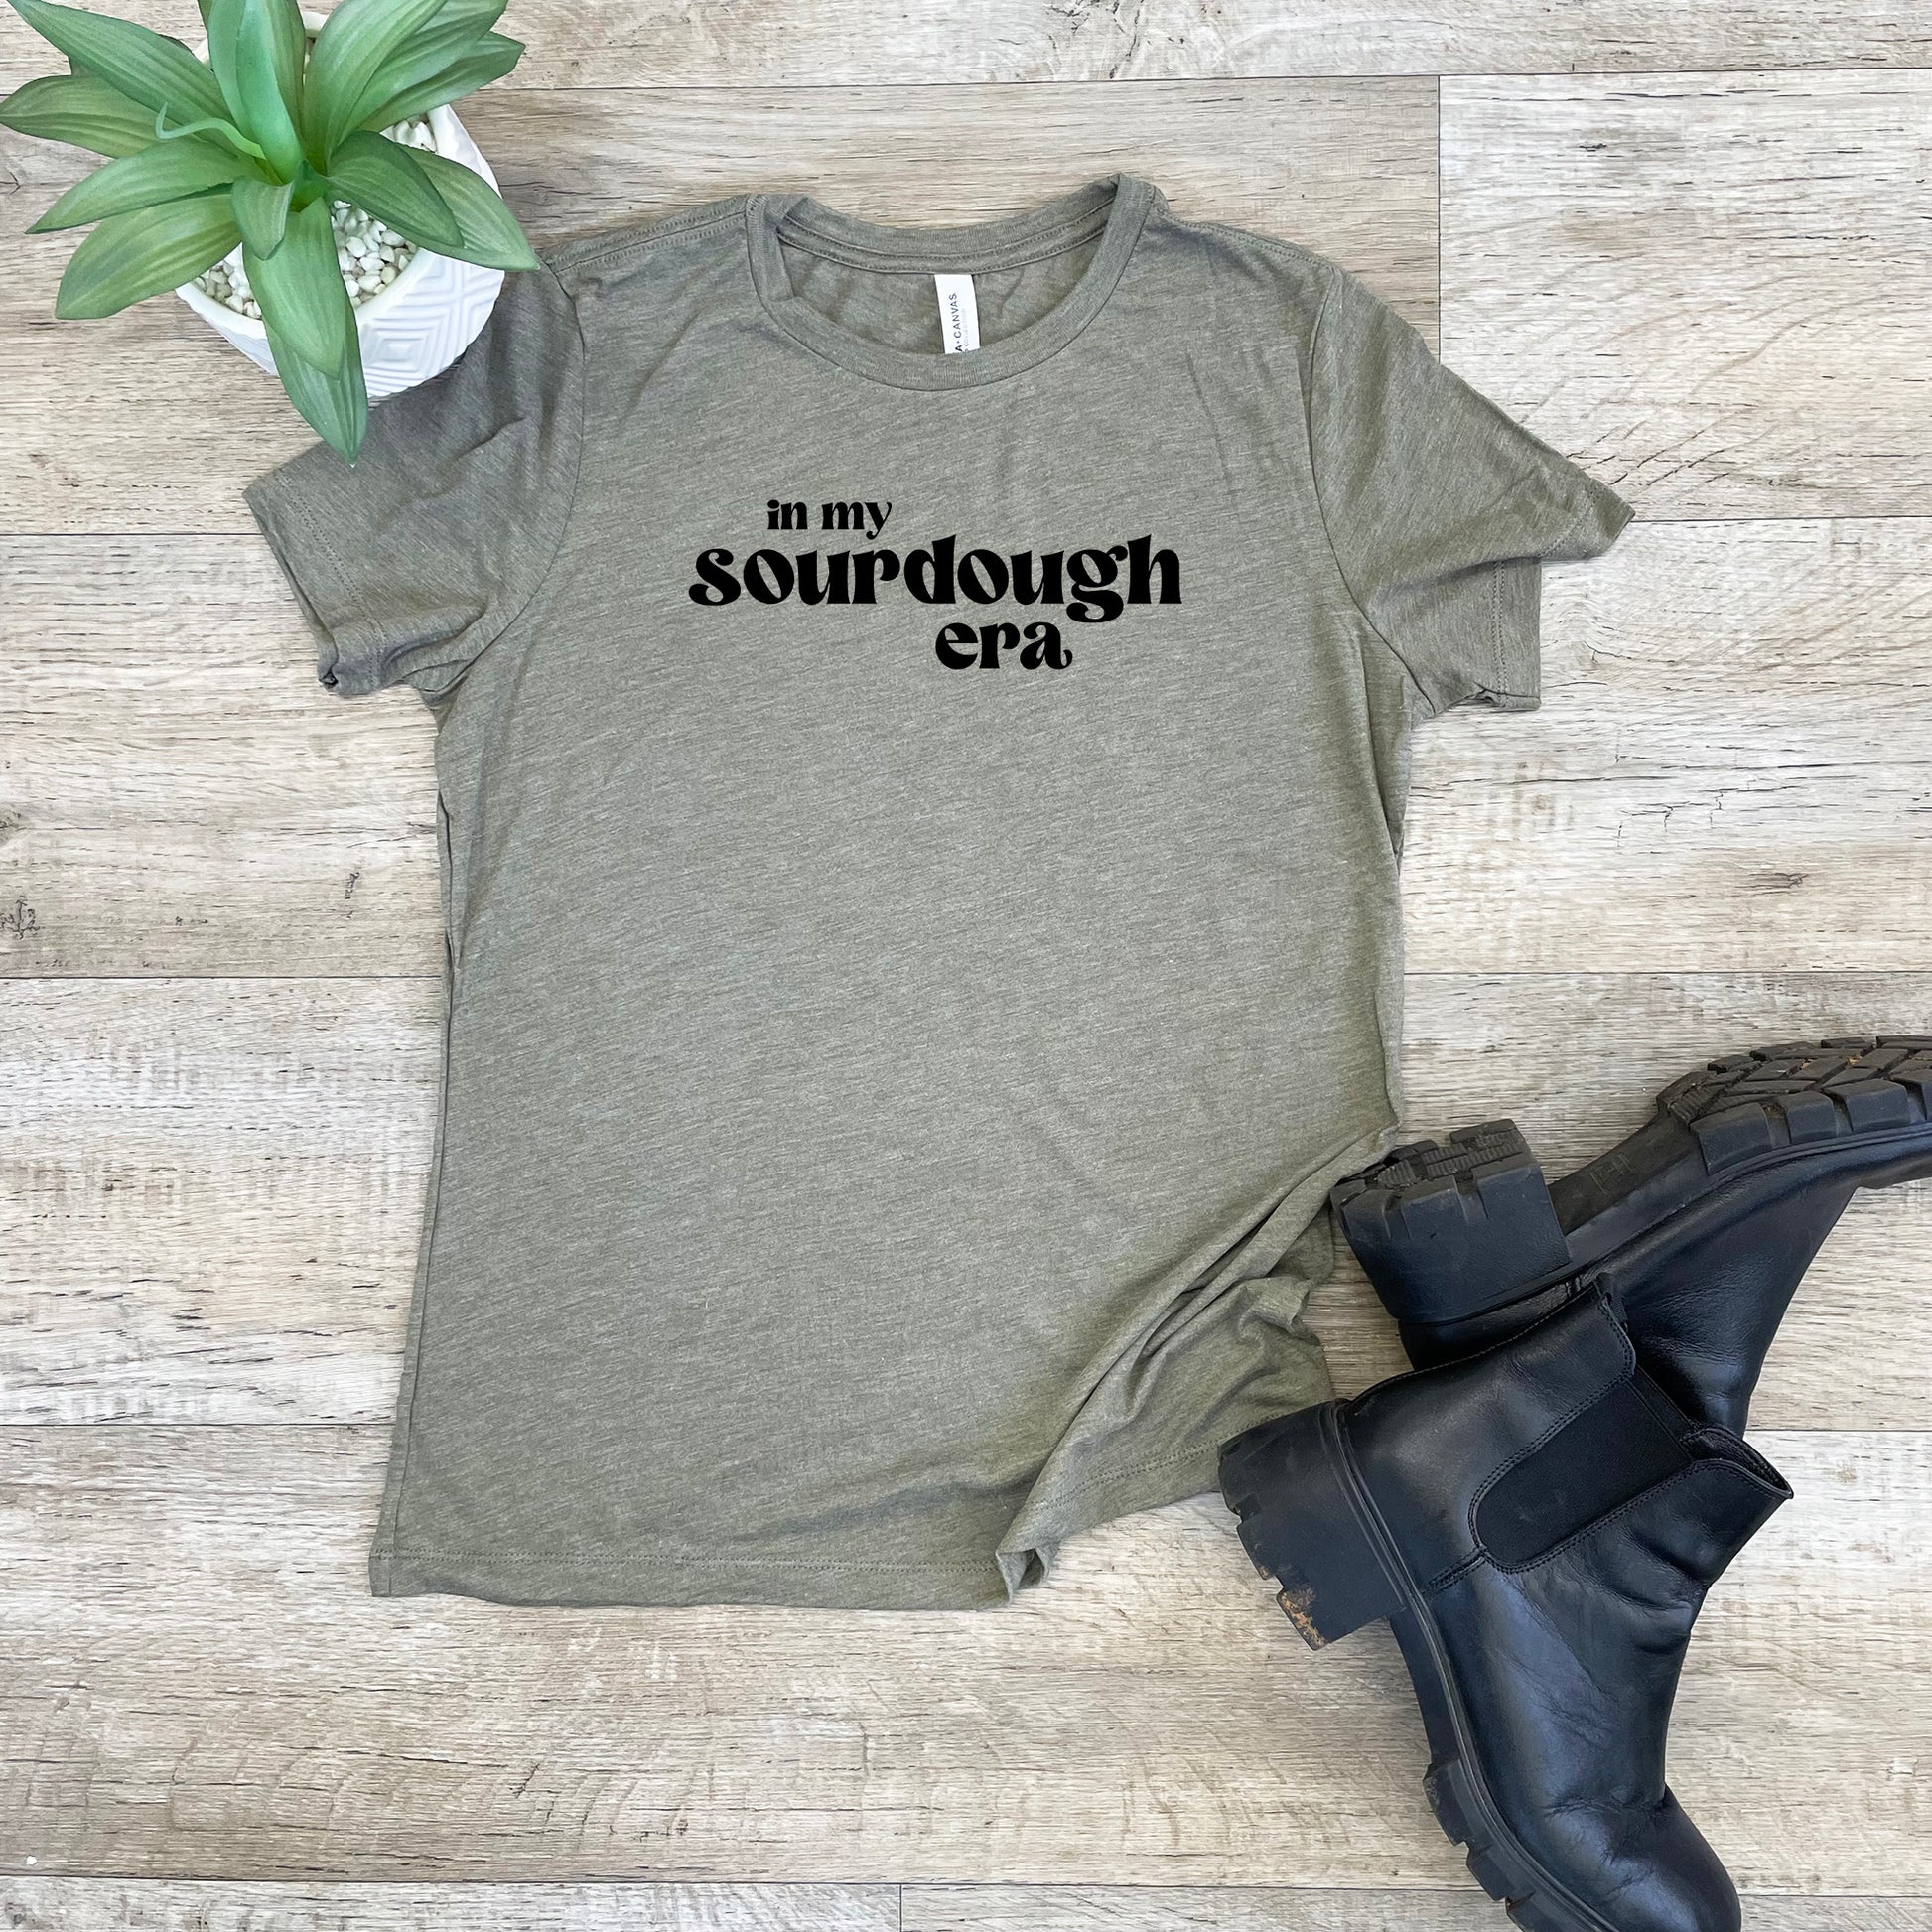 a t - shirt that says, in my soundough crew